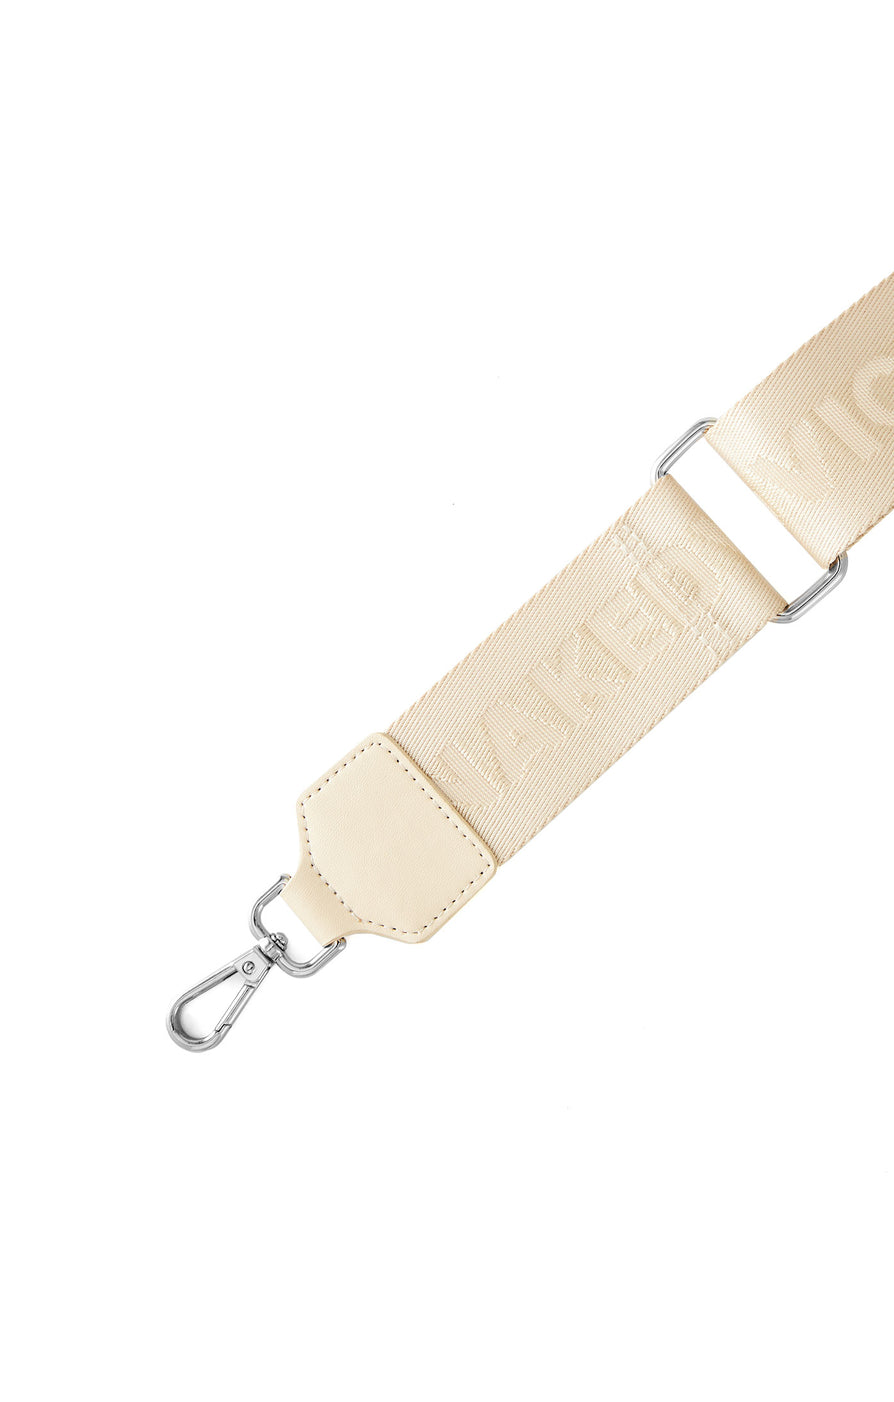 THE BRANDED IVORY STRAP | ghost